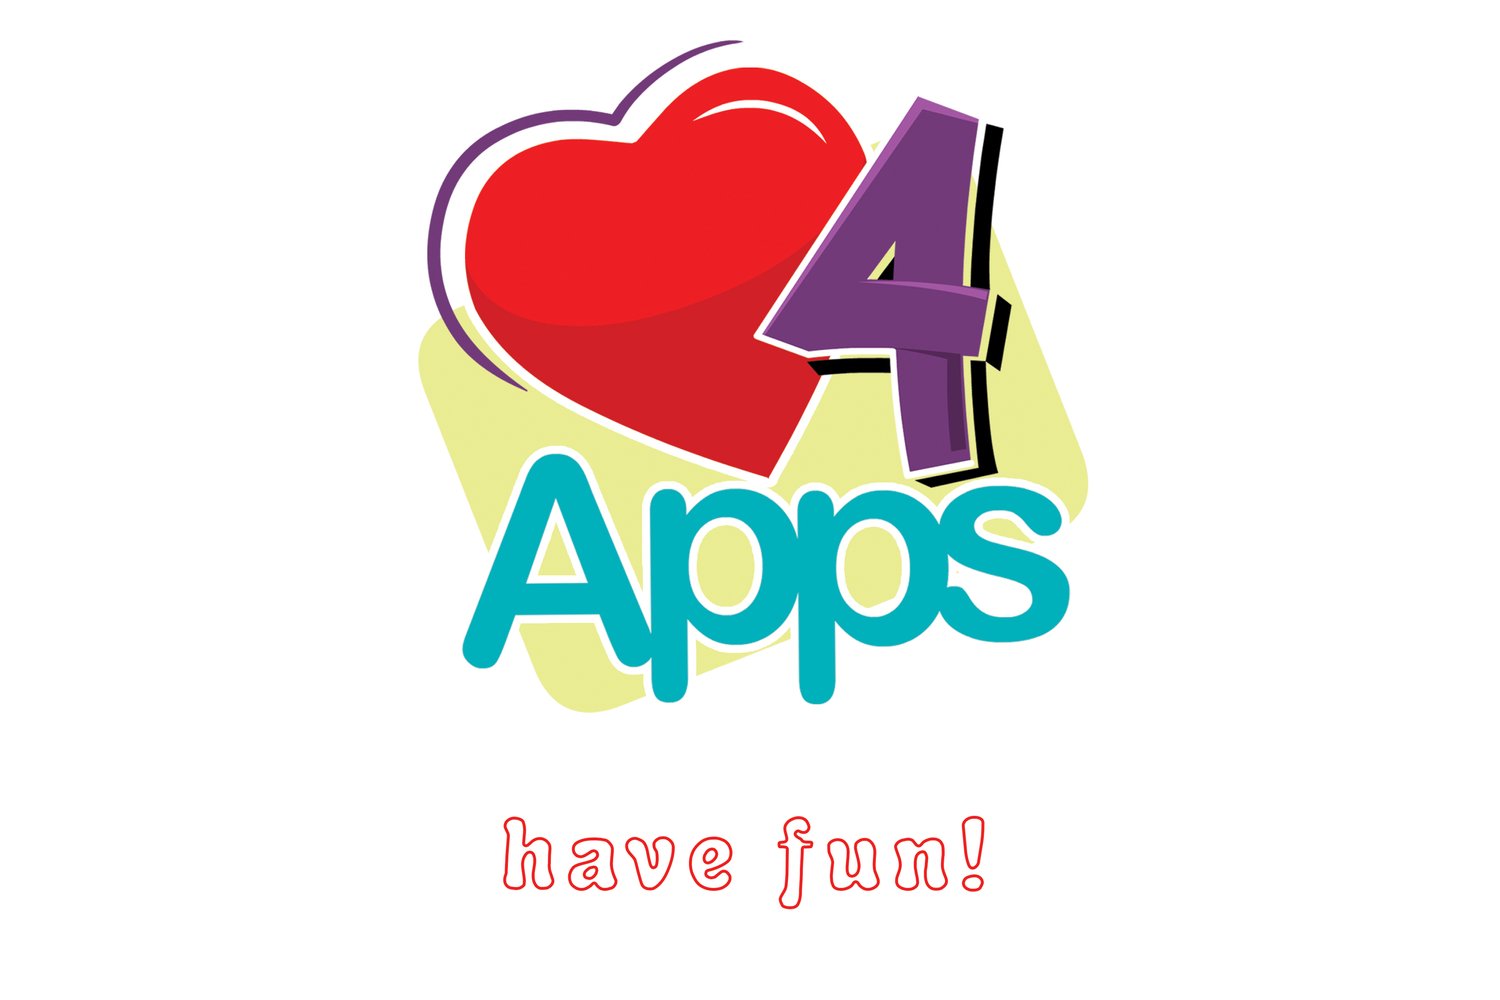 Love 4 apps